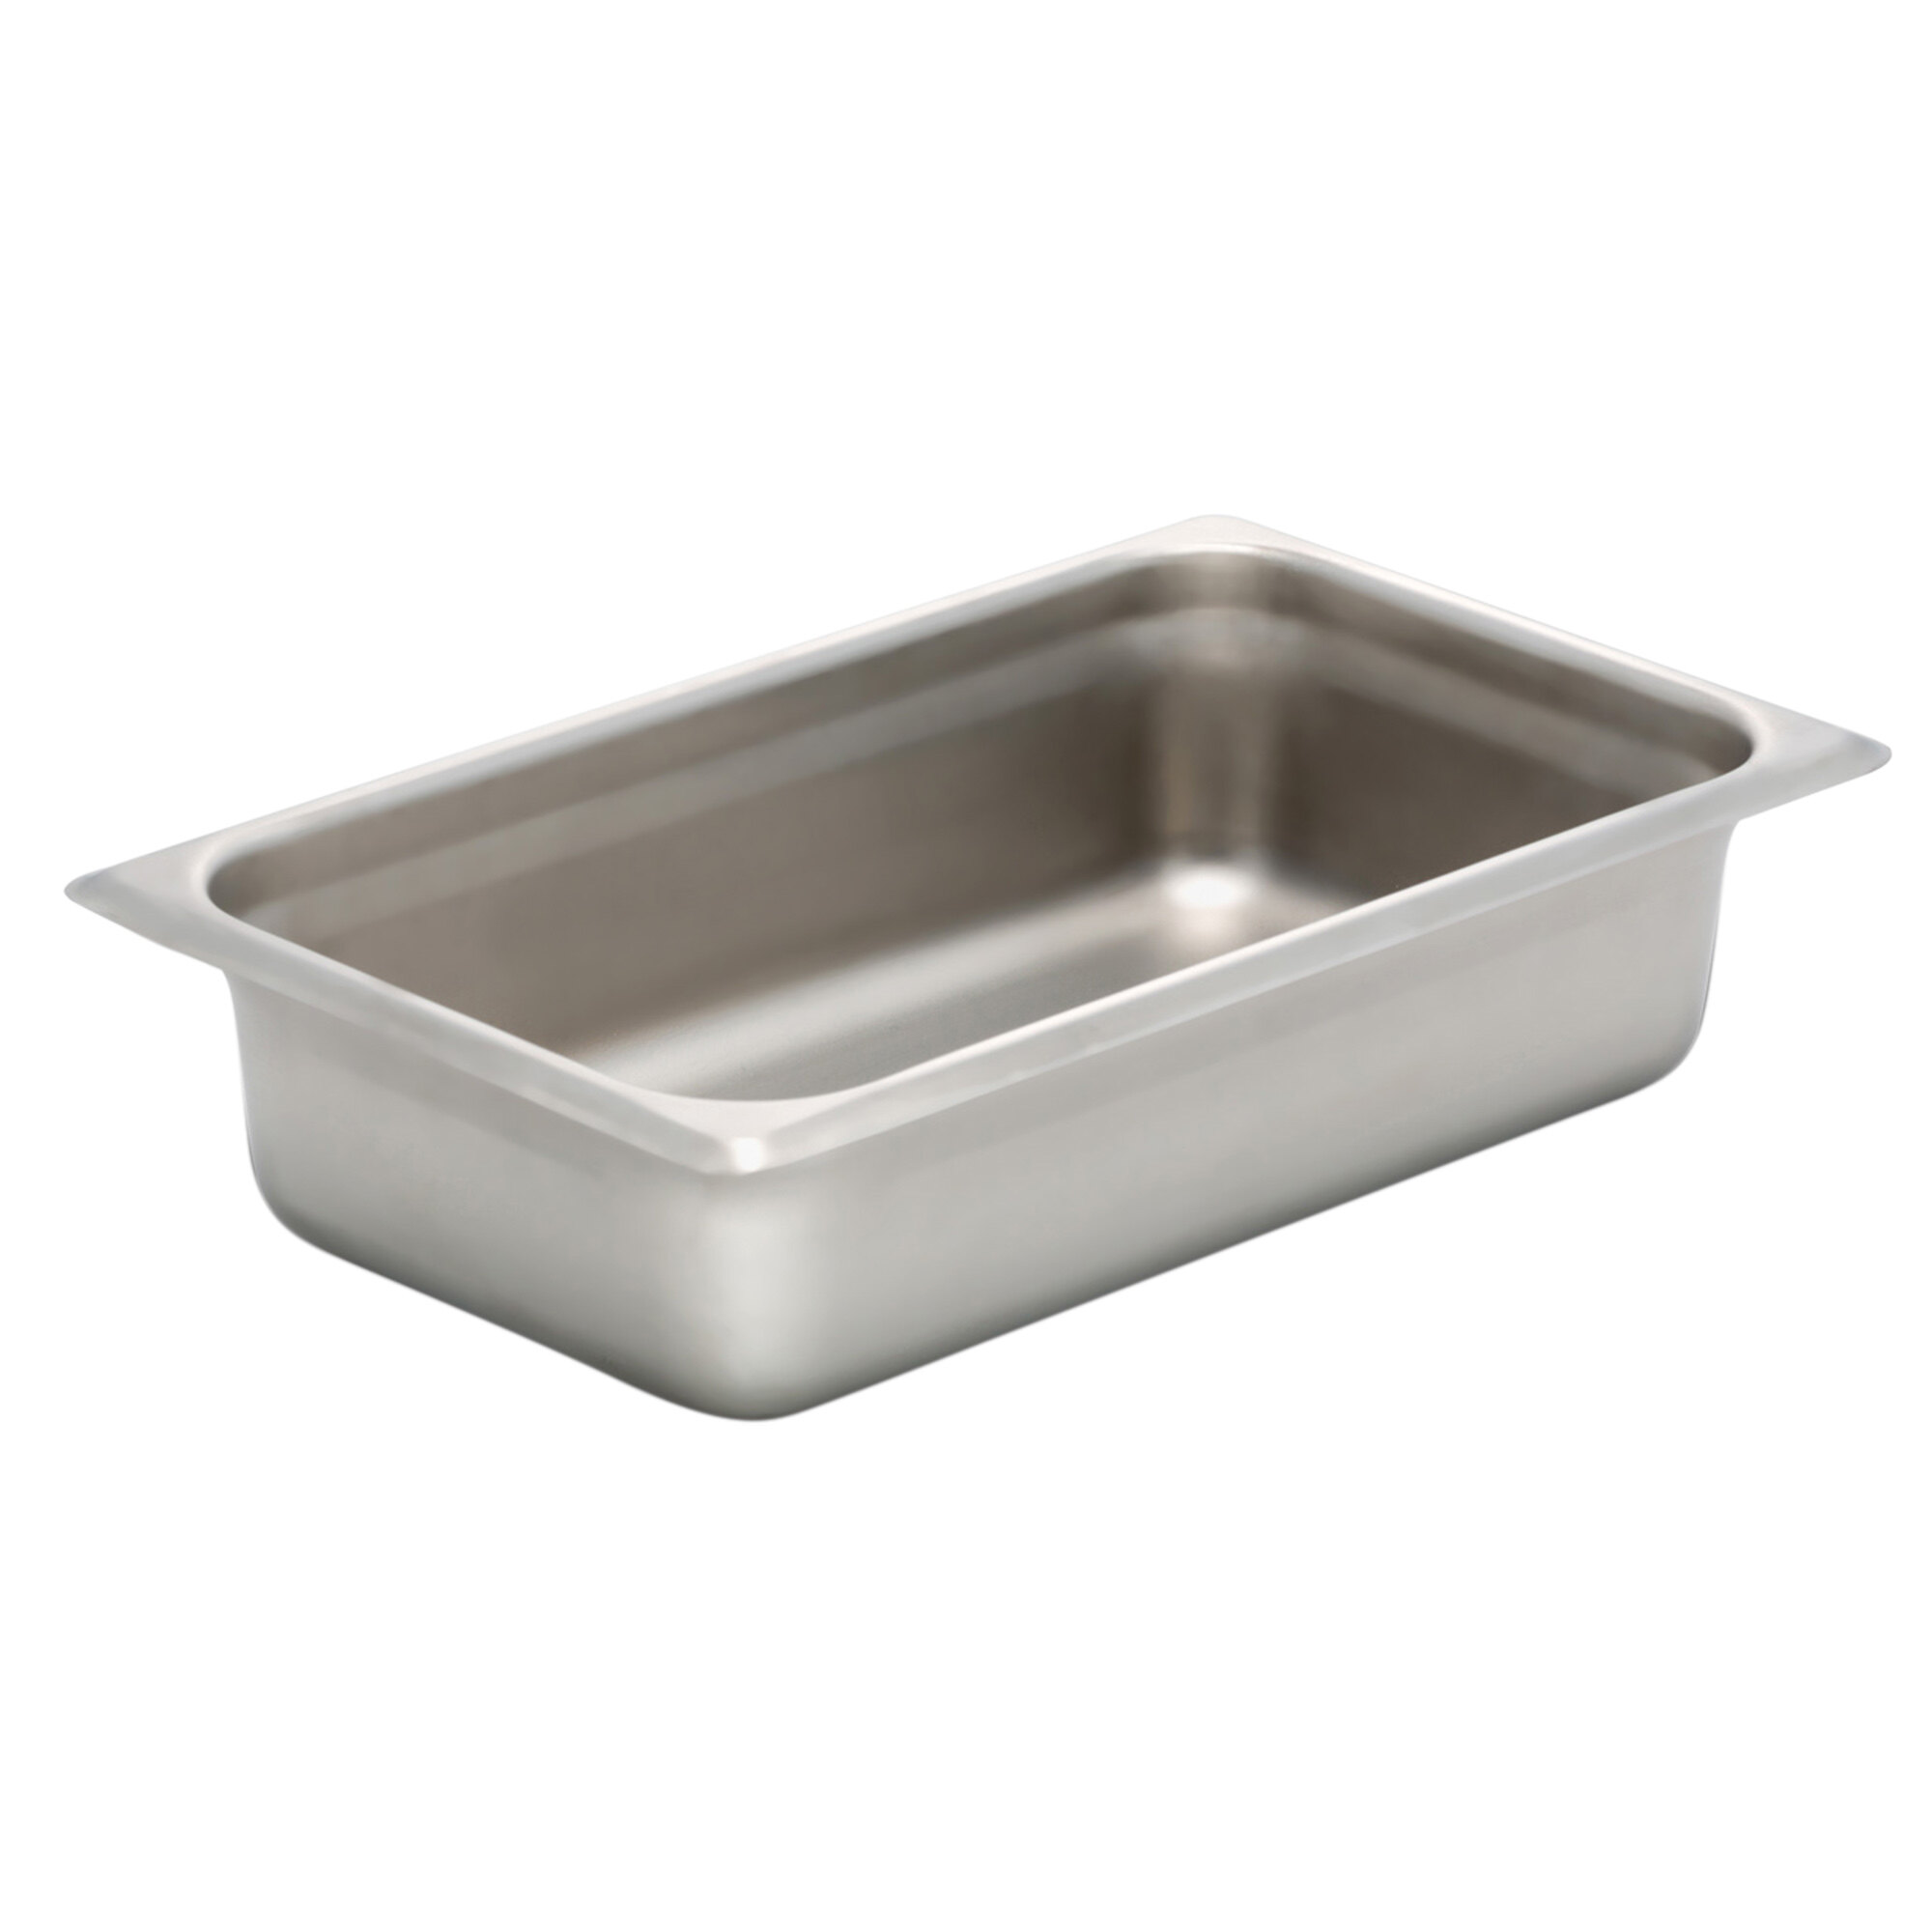 Bon Chef 12026 1 4 Size Stainless Steel Food Pan 2 1 2 Deep